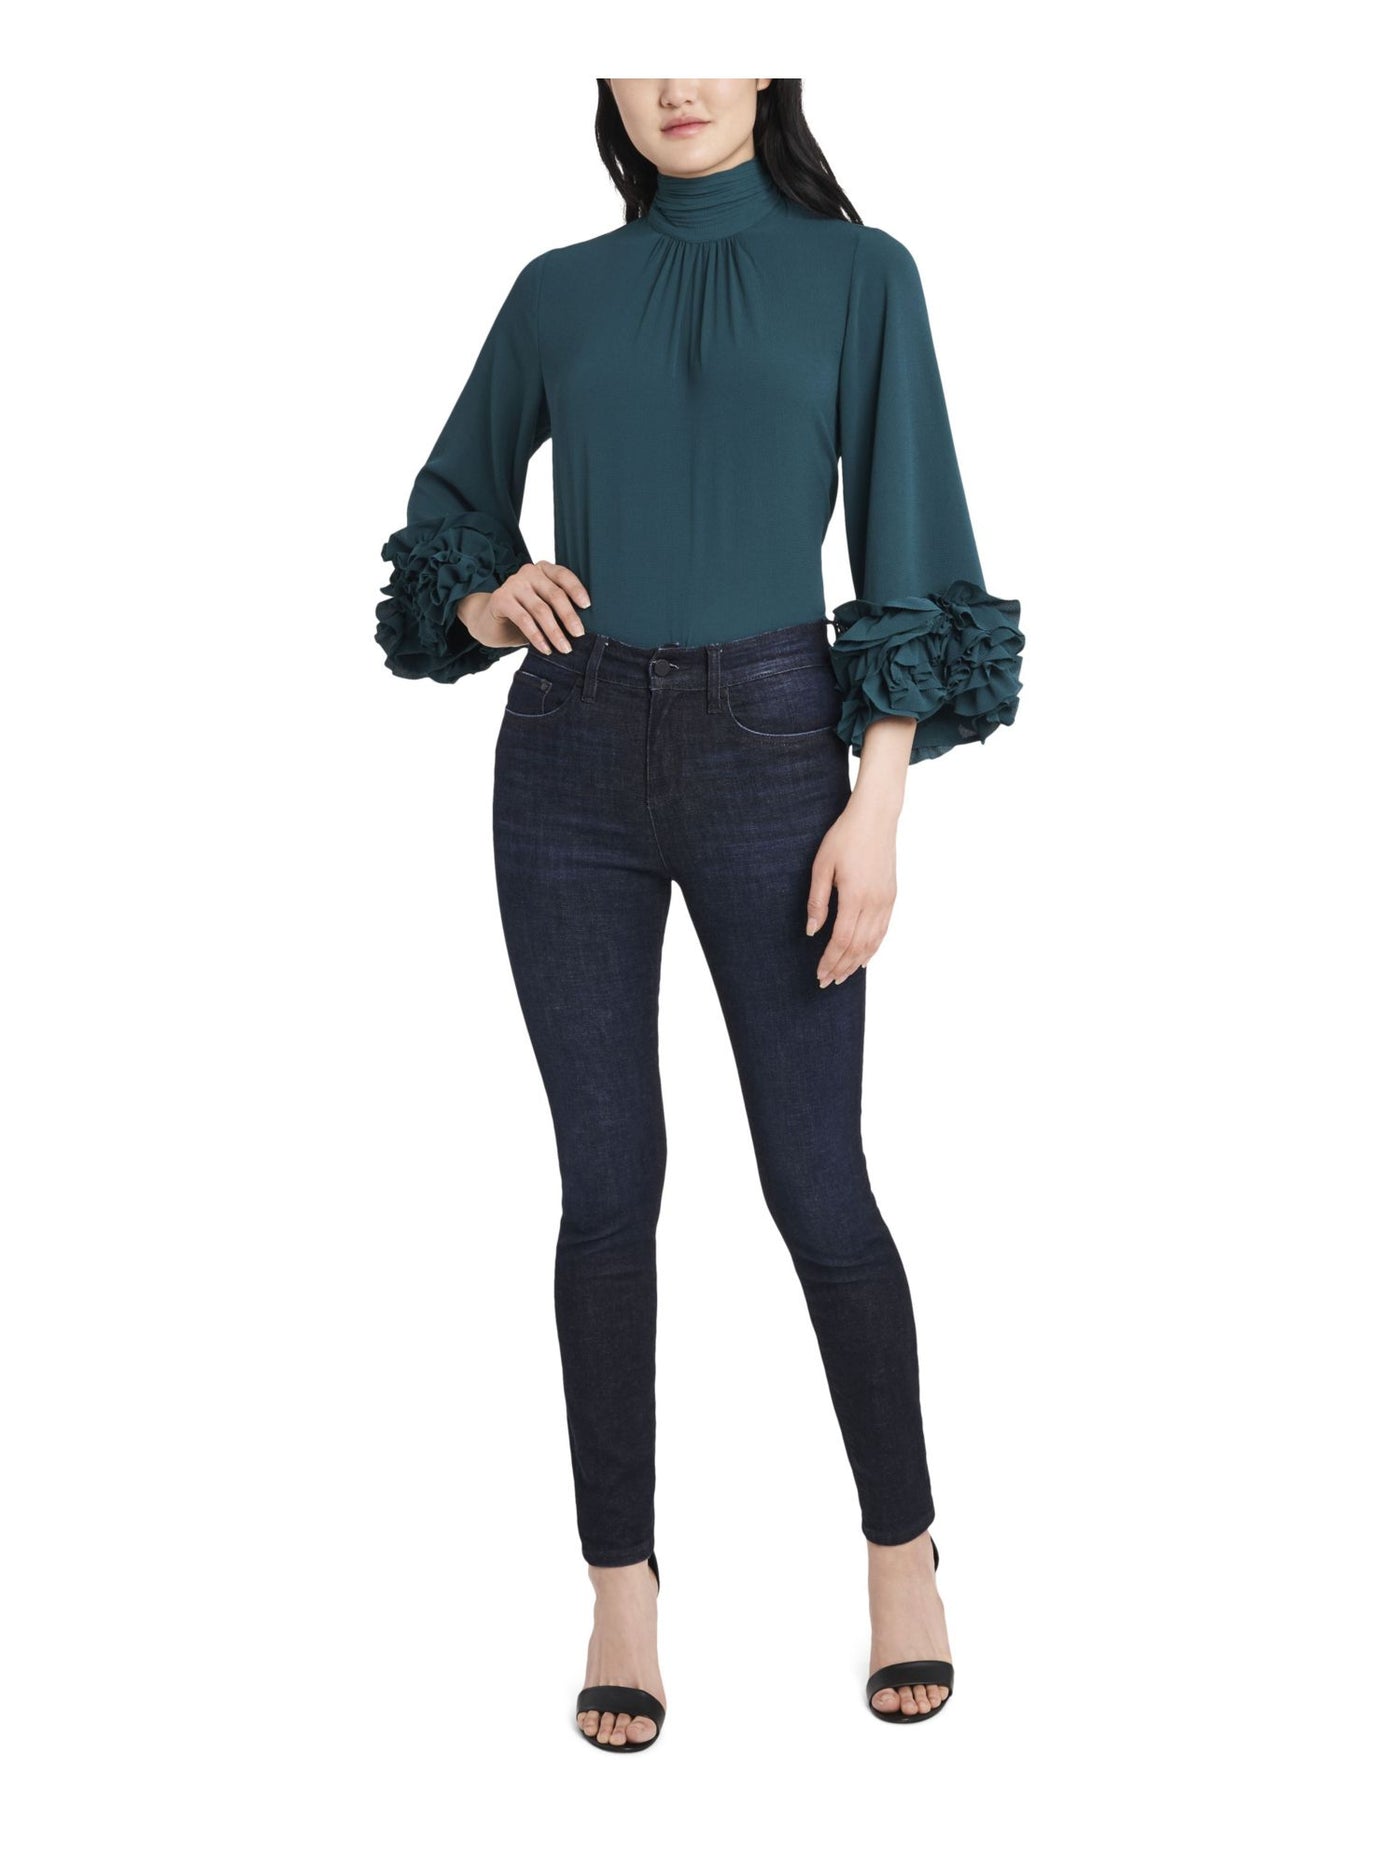 VINCE CAMUTO Womens Teal Ruffled Gathered Keyhole Back 3/4 Sleeve Mock Neck Wear To Work Top XS